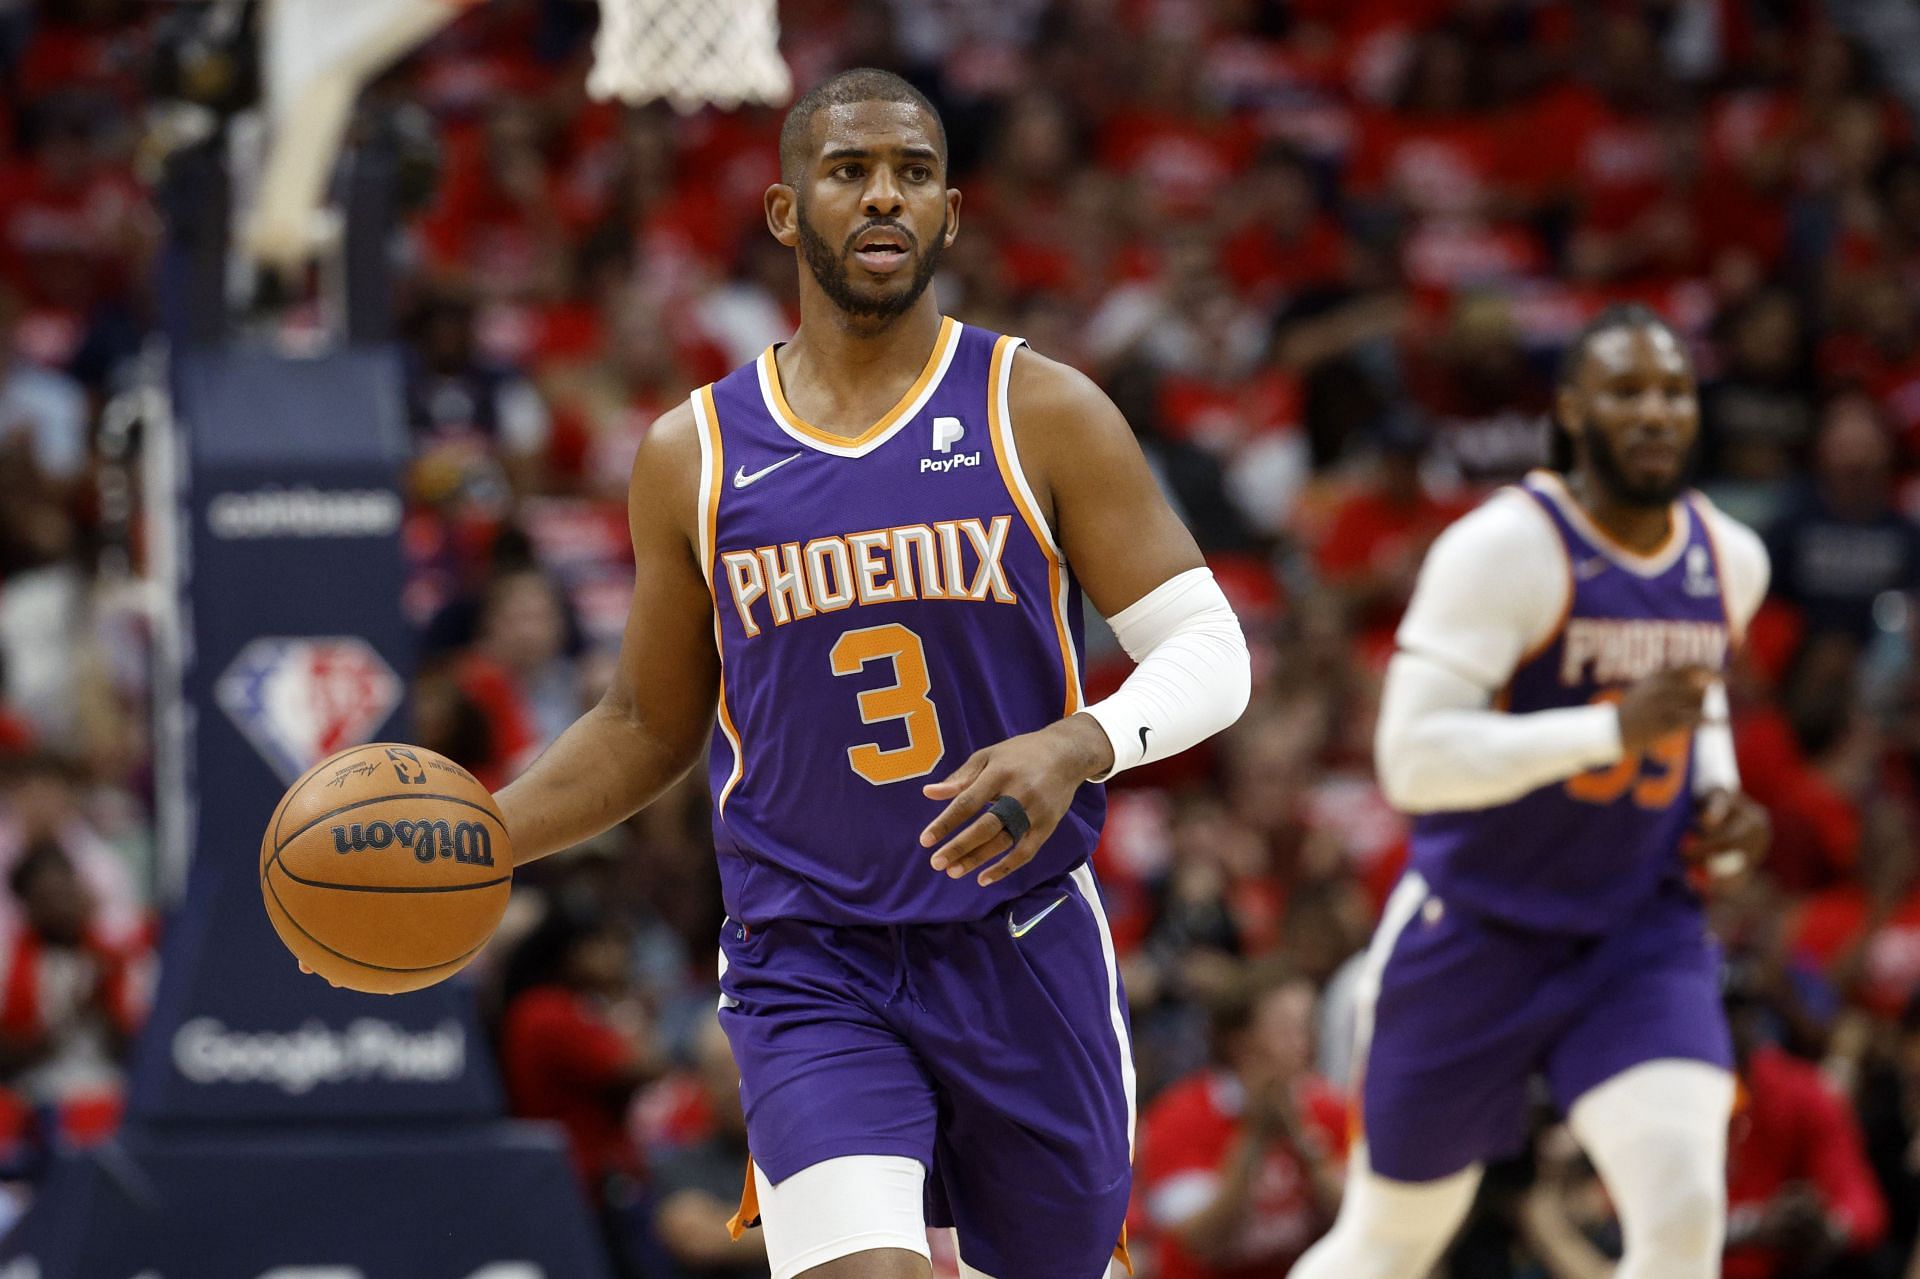 Chris Paul of the Phoenix Suns dribbles against the New Orleans Pelicans on April 28 in New Orleans.